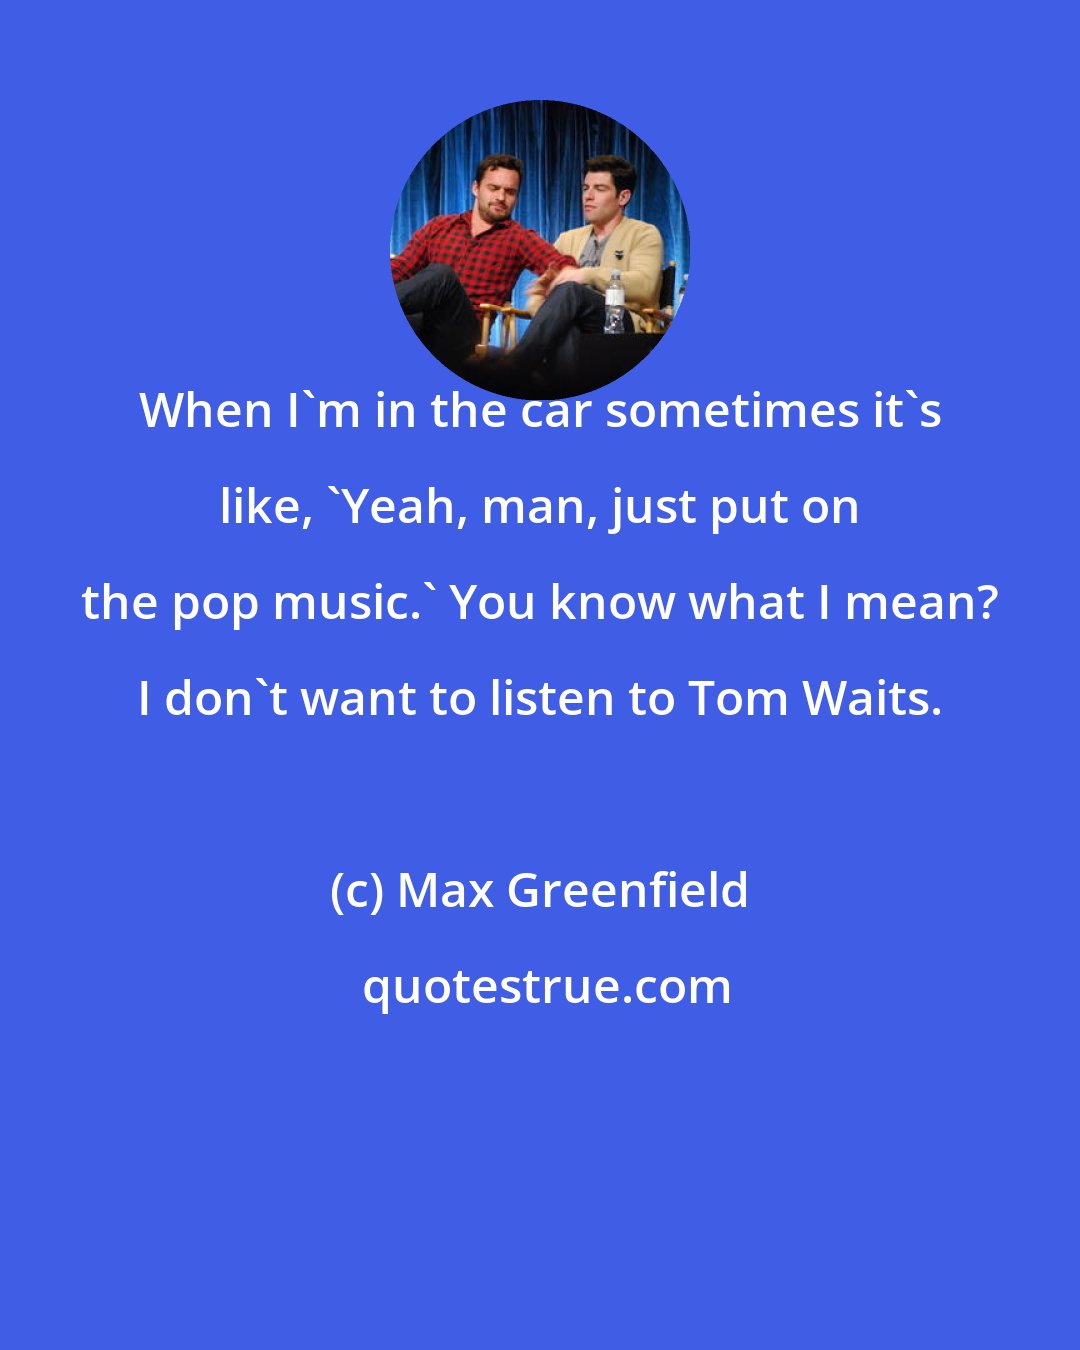 Max Greenfield: When I'm in the car sometimes it's like, 'Yeah, man, just put on the pop music.' You know what I mean? I don't want to listen to Tom Waits.